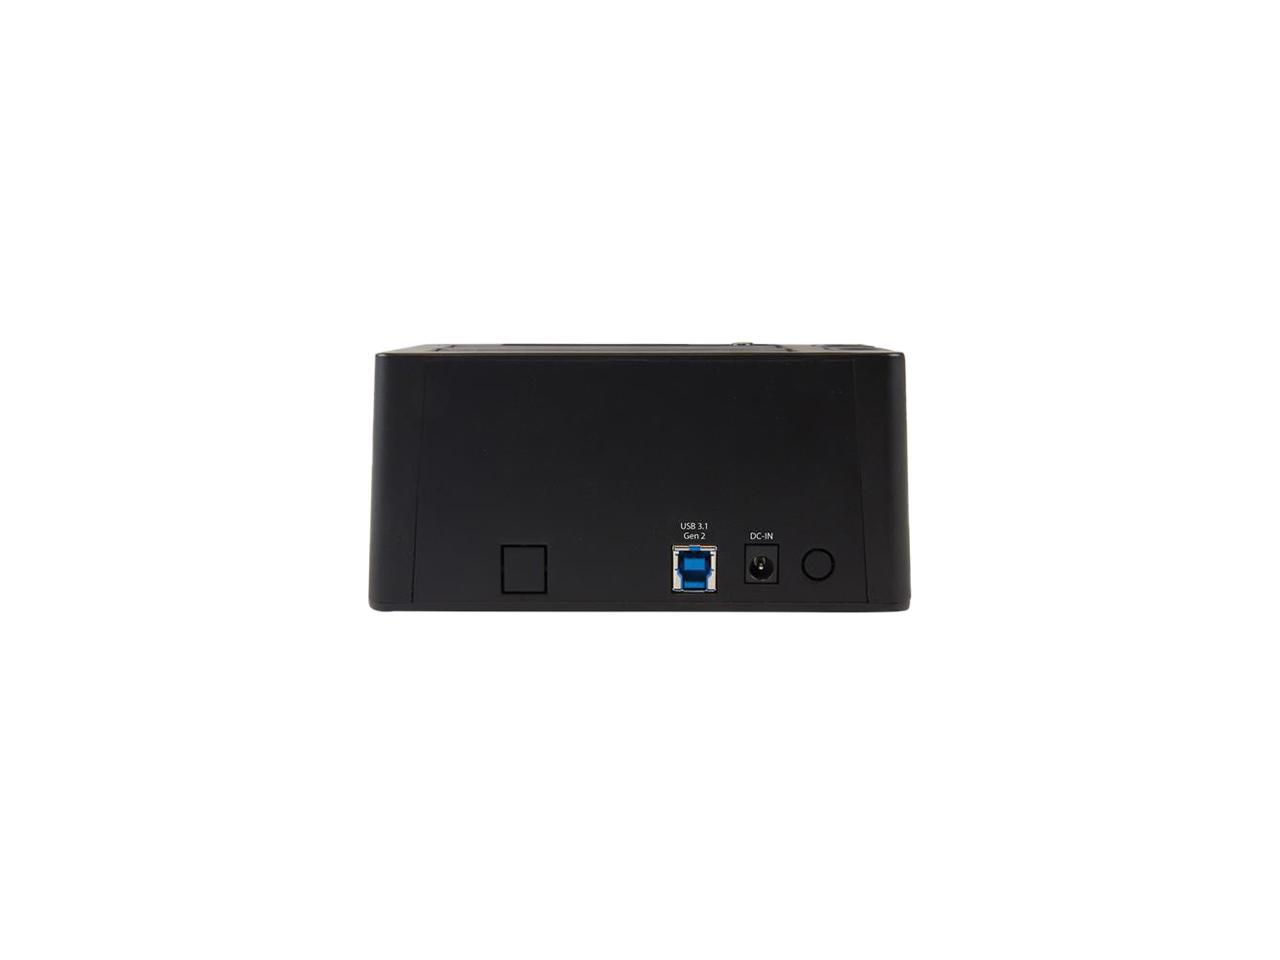 StarTech.com SDOCK2U313 USB 3.1 Gen 2 (10Gbps) Dual-Bay Dock for 2.5"/3.5" SATA SSD/HDDs - Supports SATA I, II, III and UASP - Top-loading - image 2 of 4